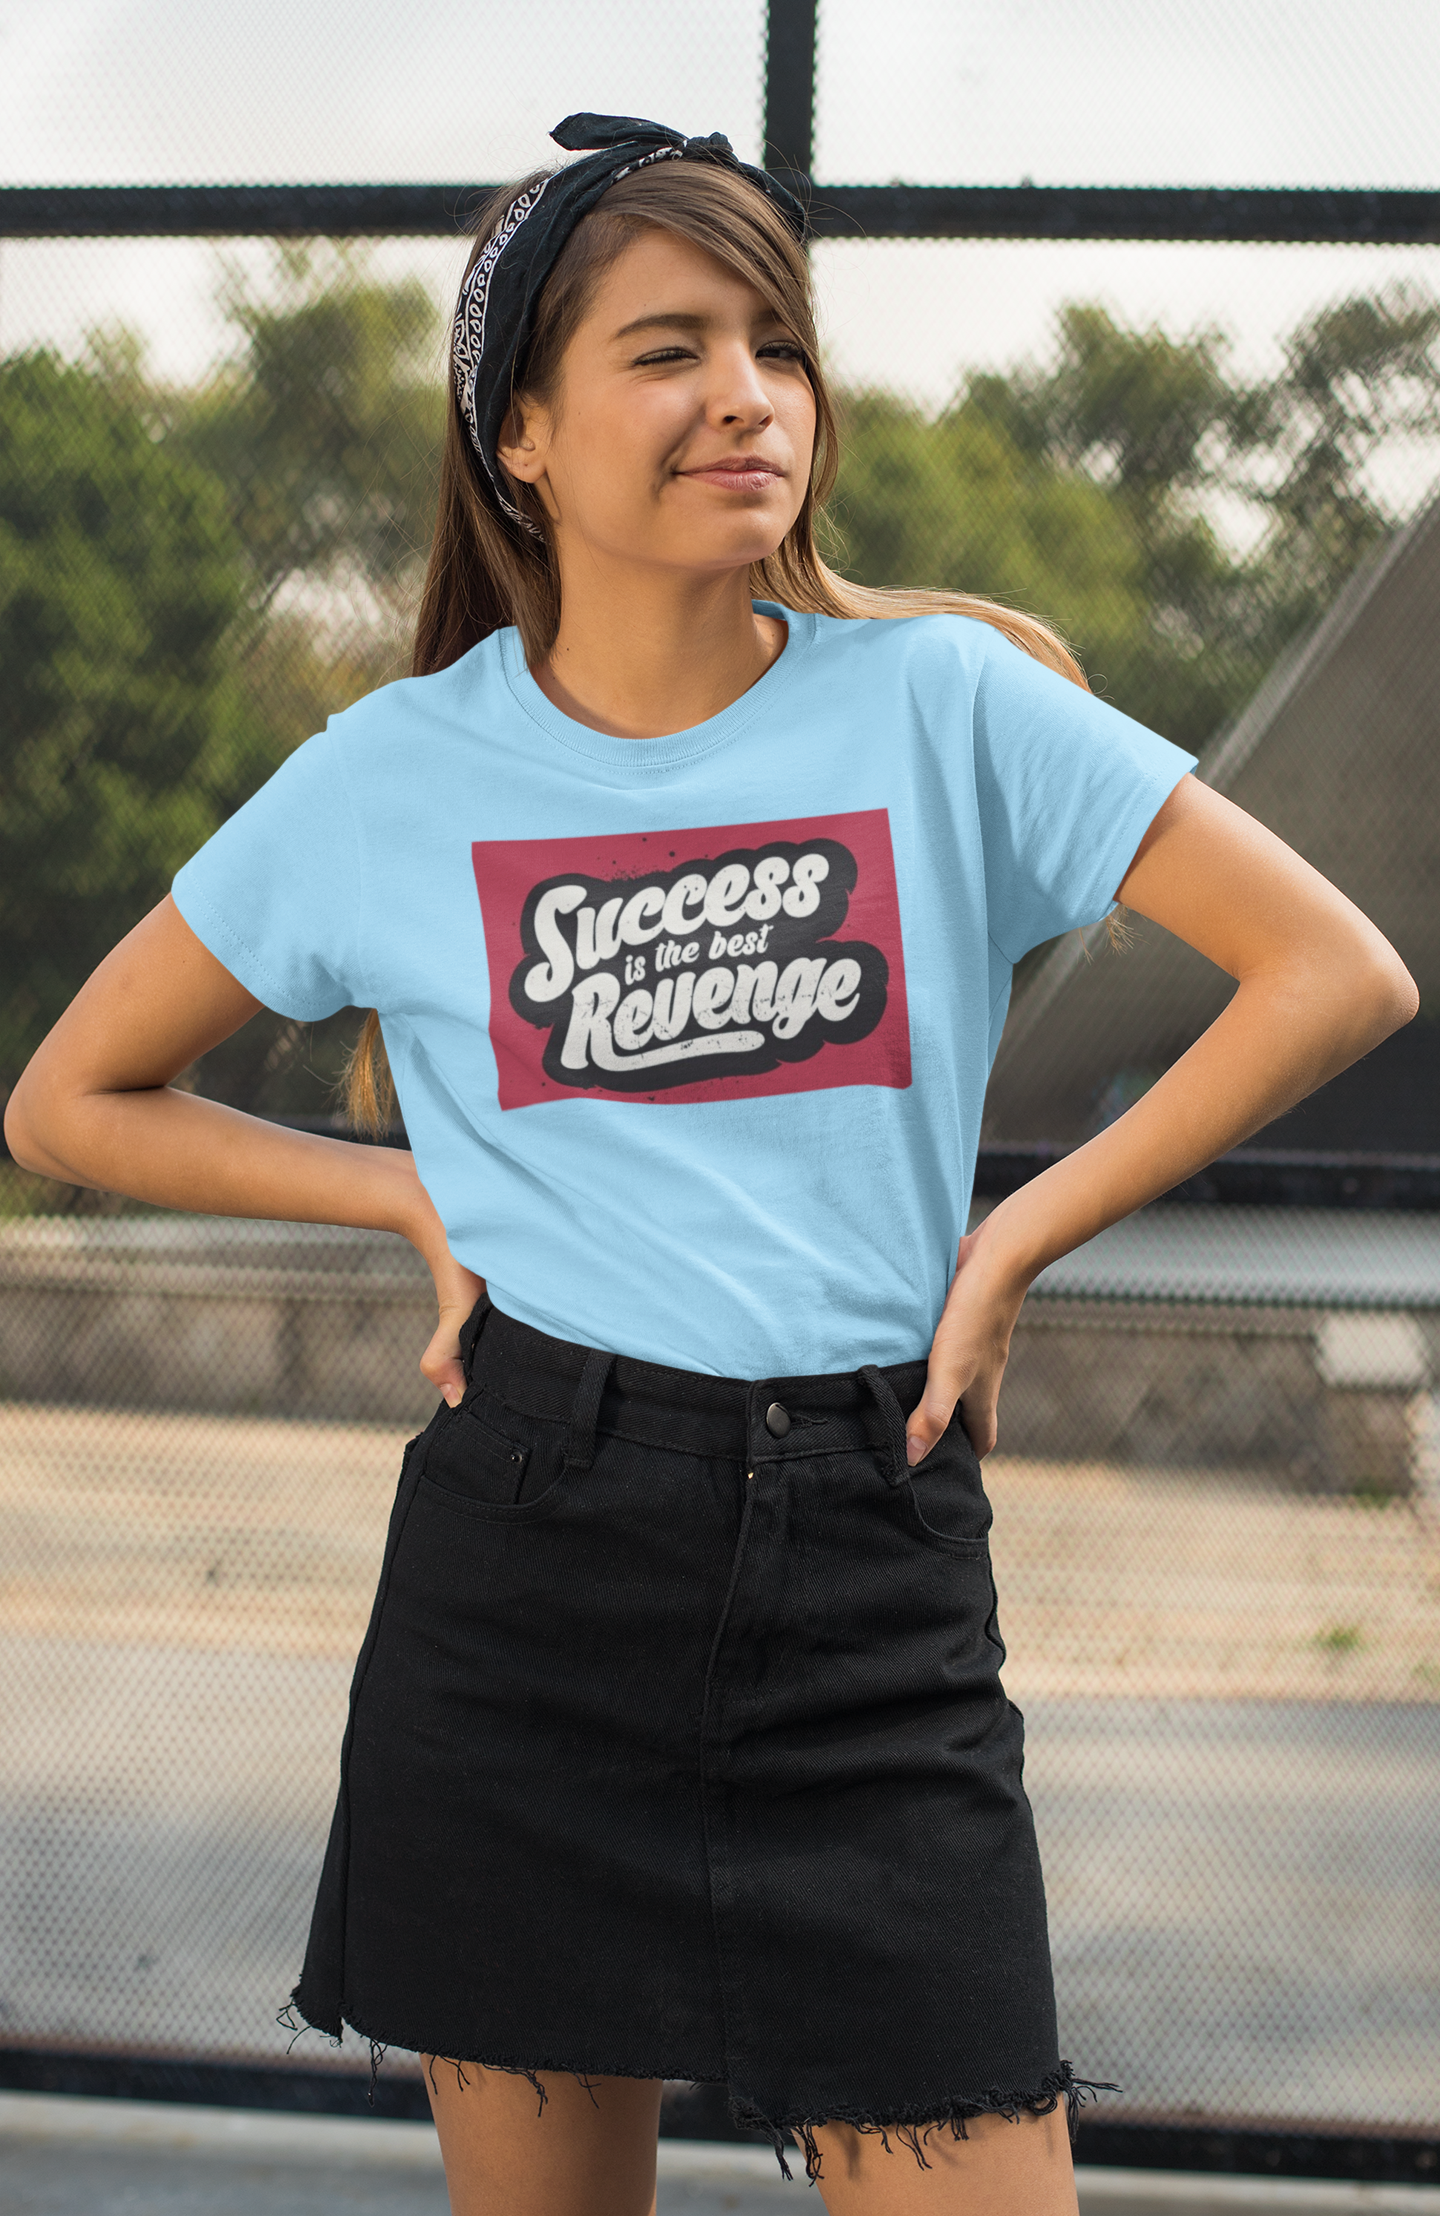 Success Is The Best Revenge - Gym T Shirt Strong Soul Shirts & Tops